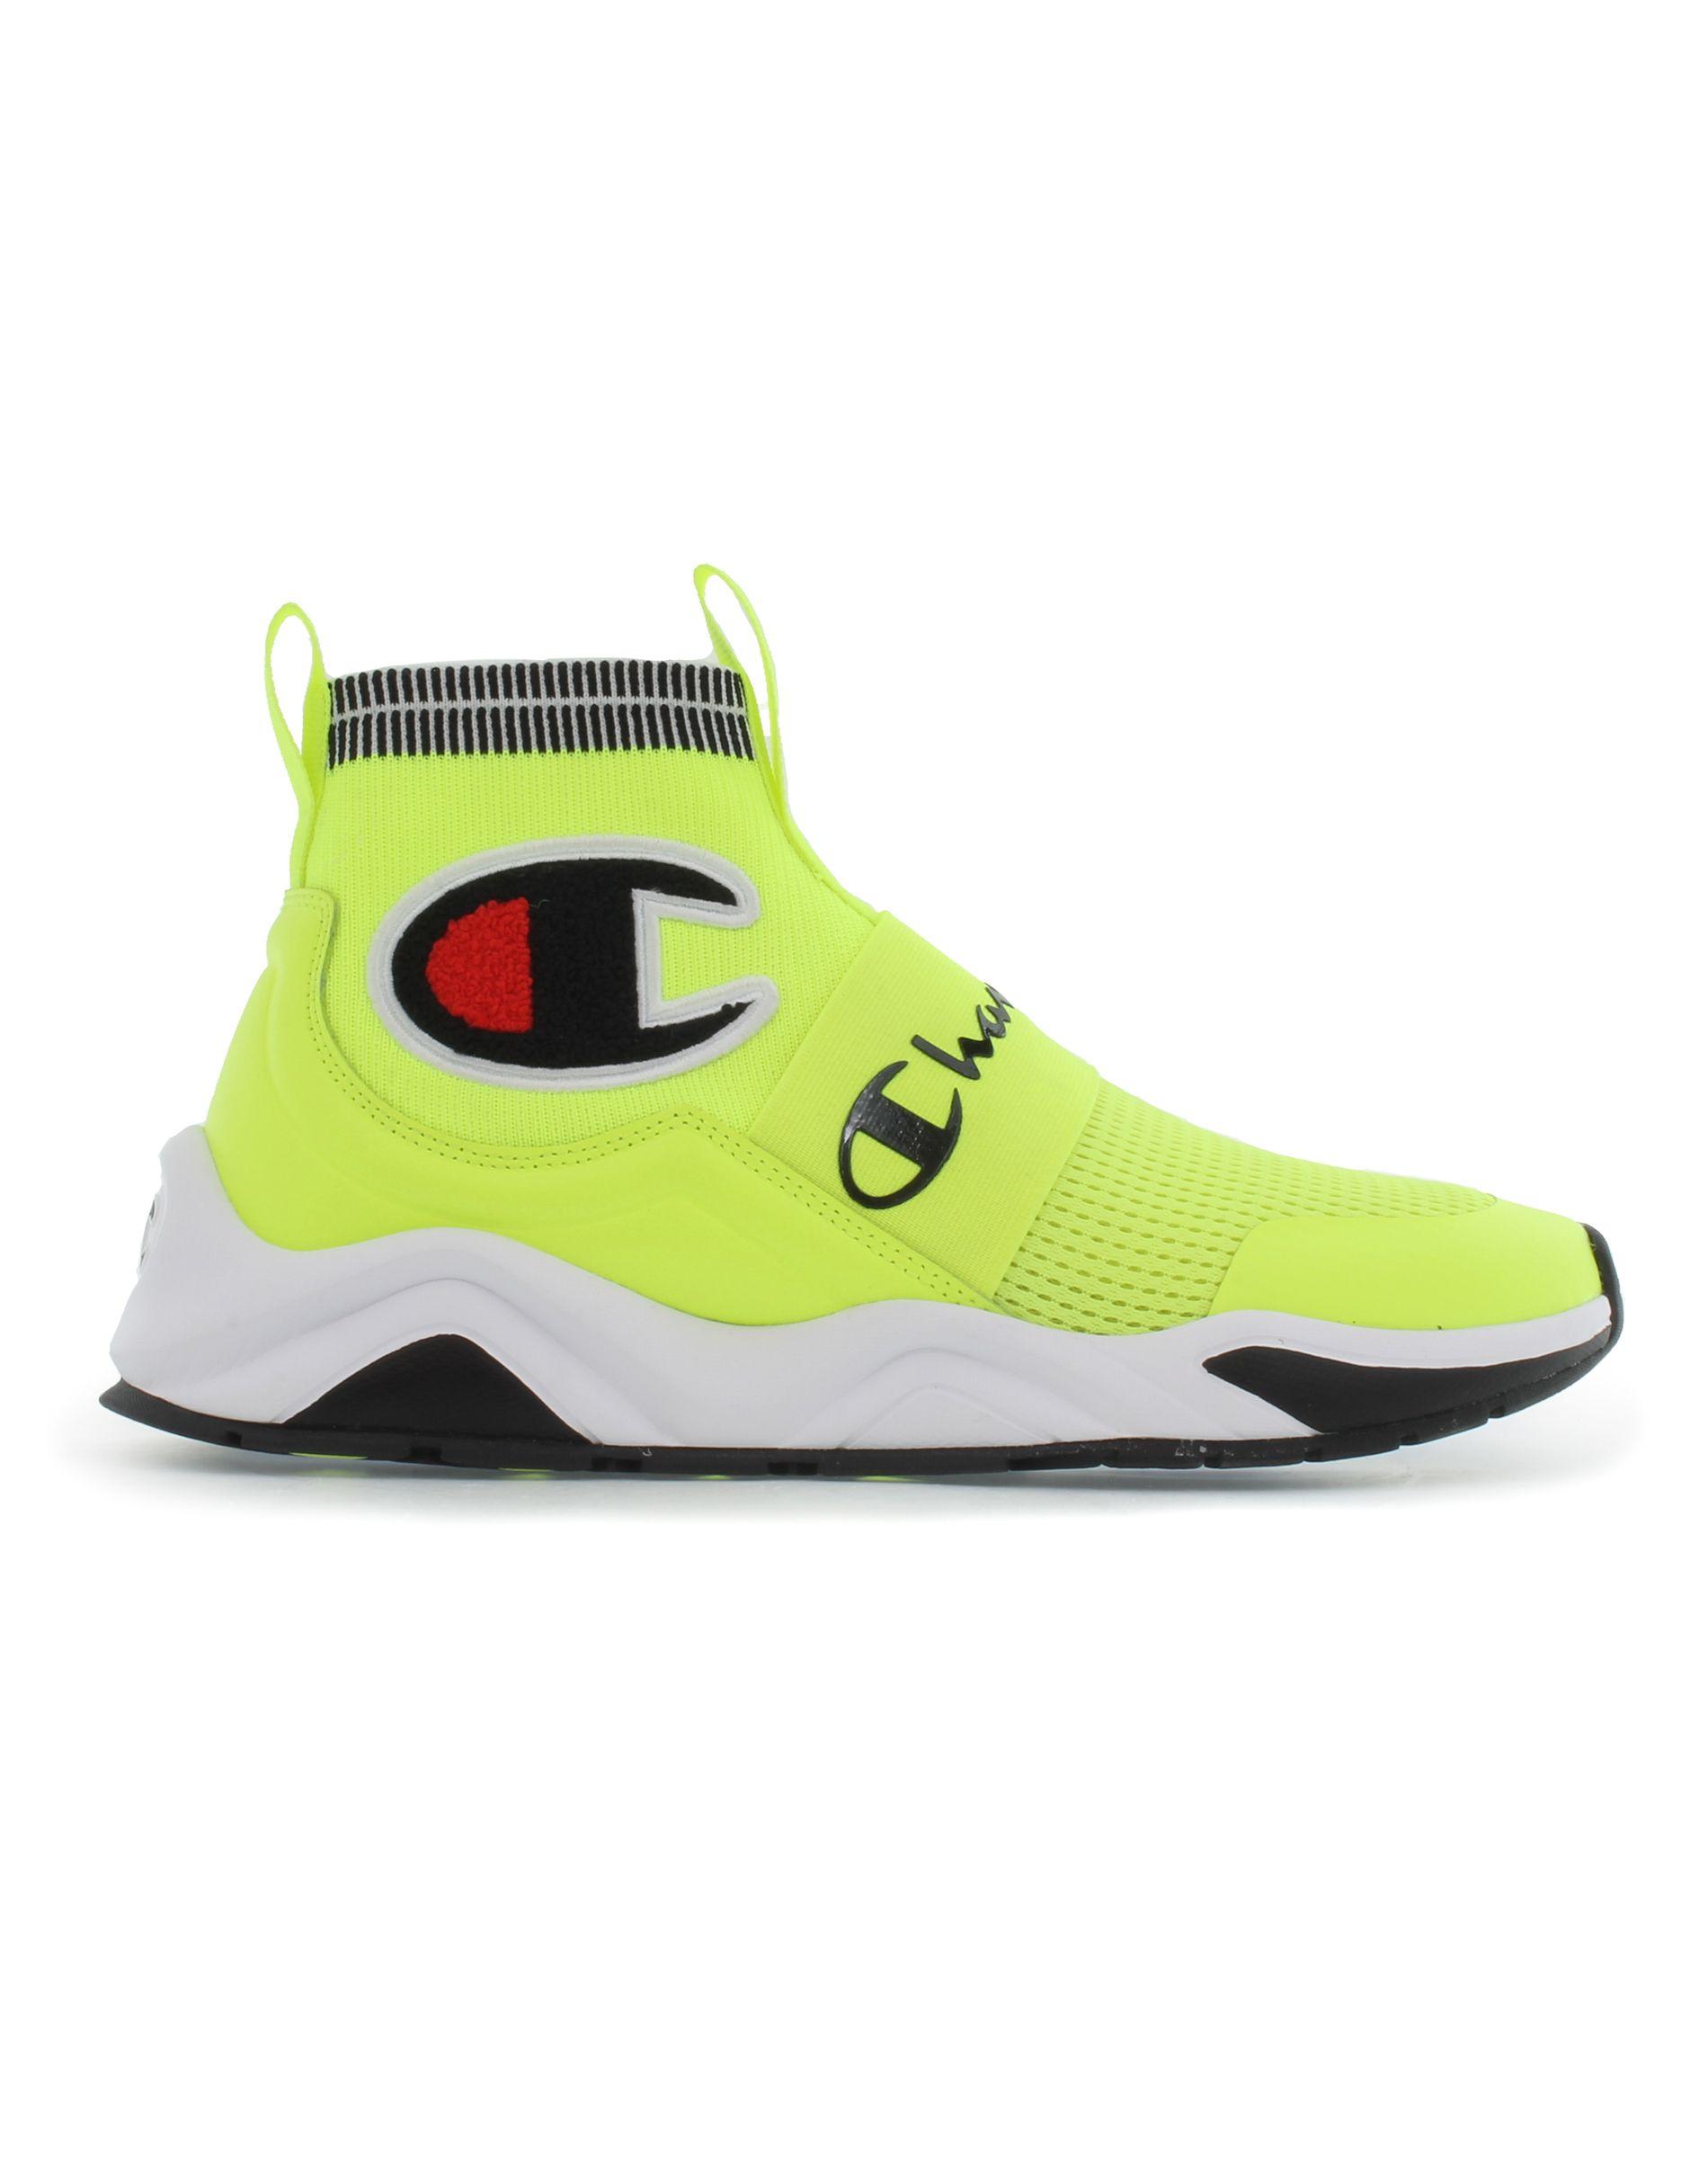 Champion Suede Lifetm Rally Pro Shoes, Neon Light/black for Men - Lyst